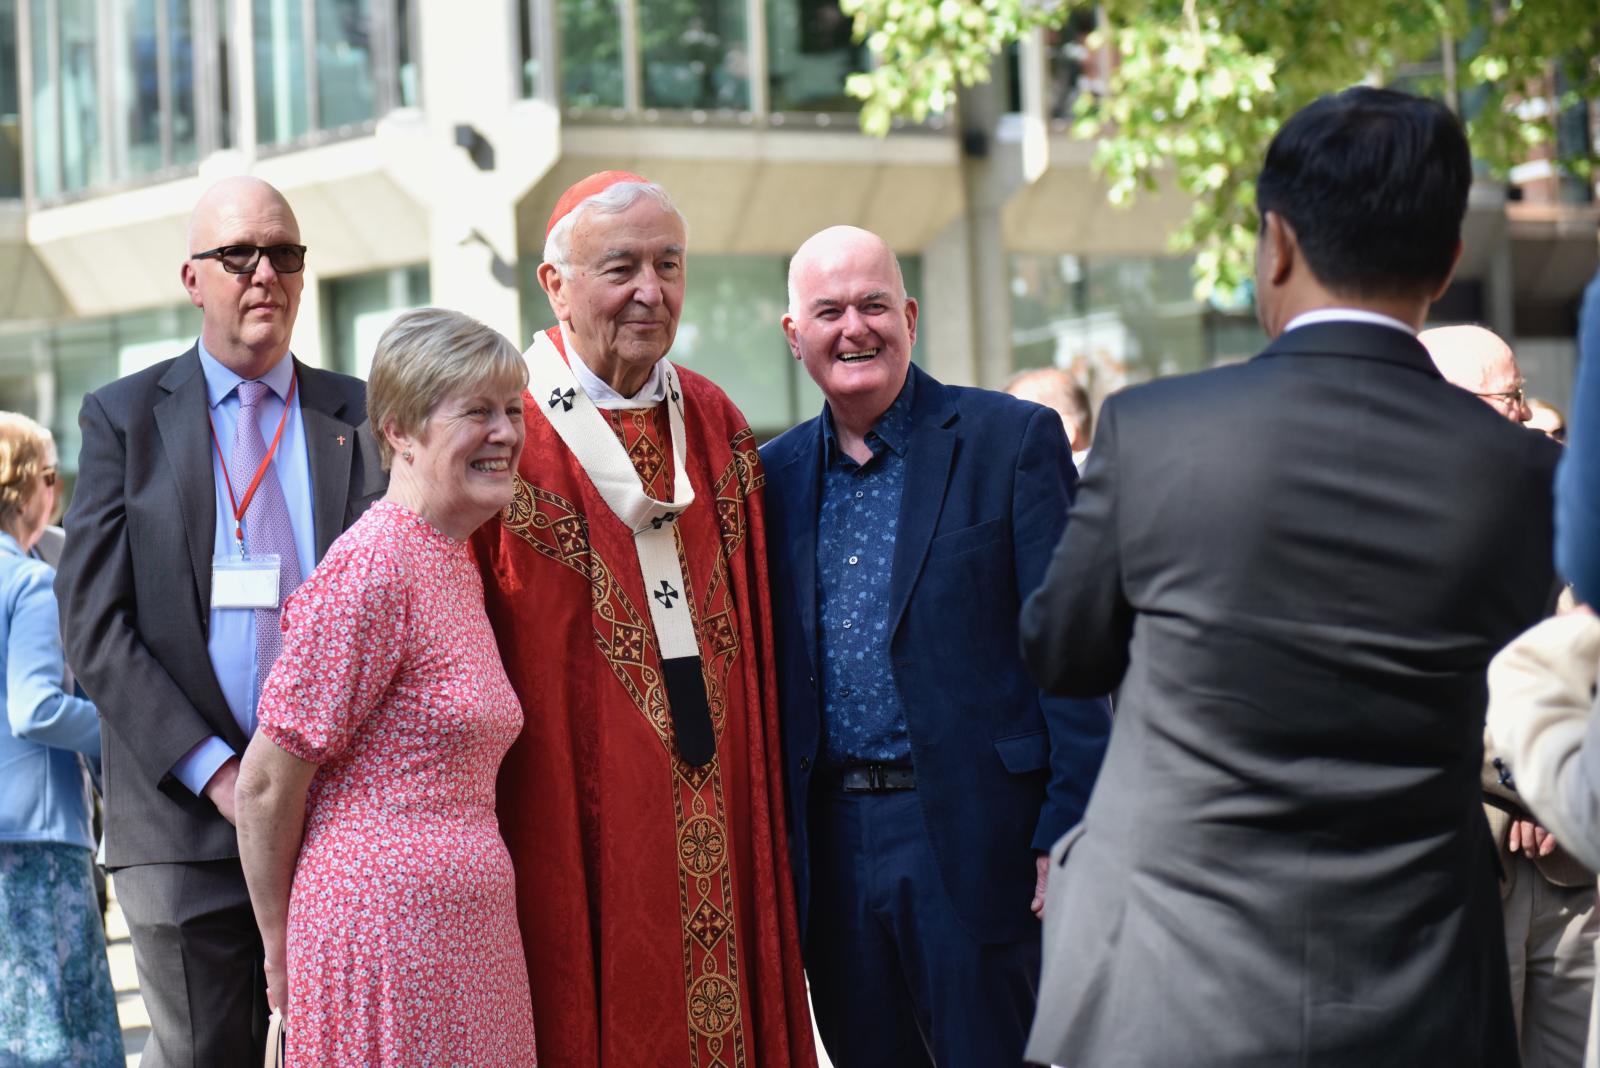 Over 430 couples witness to 'demanding vocation' of married love - Diocese of Westminster